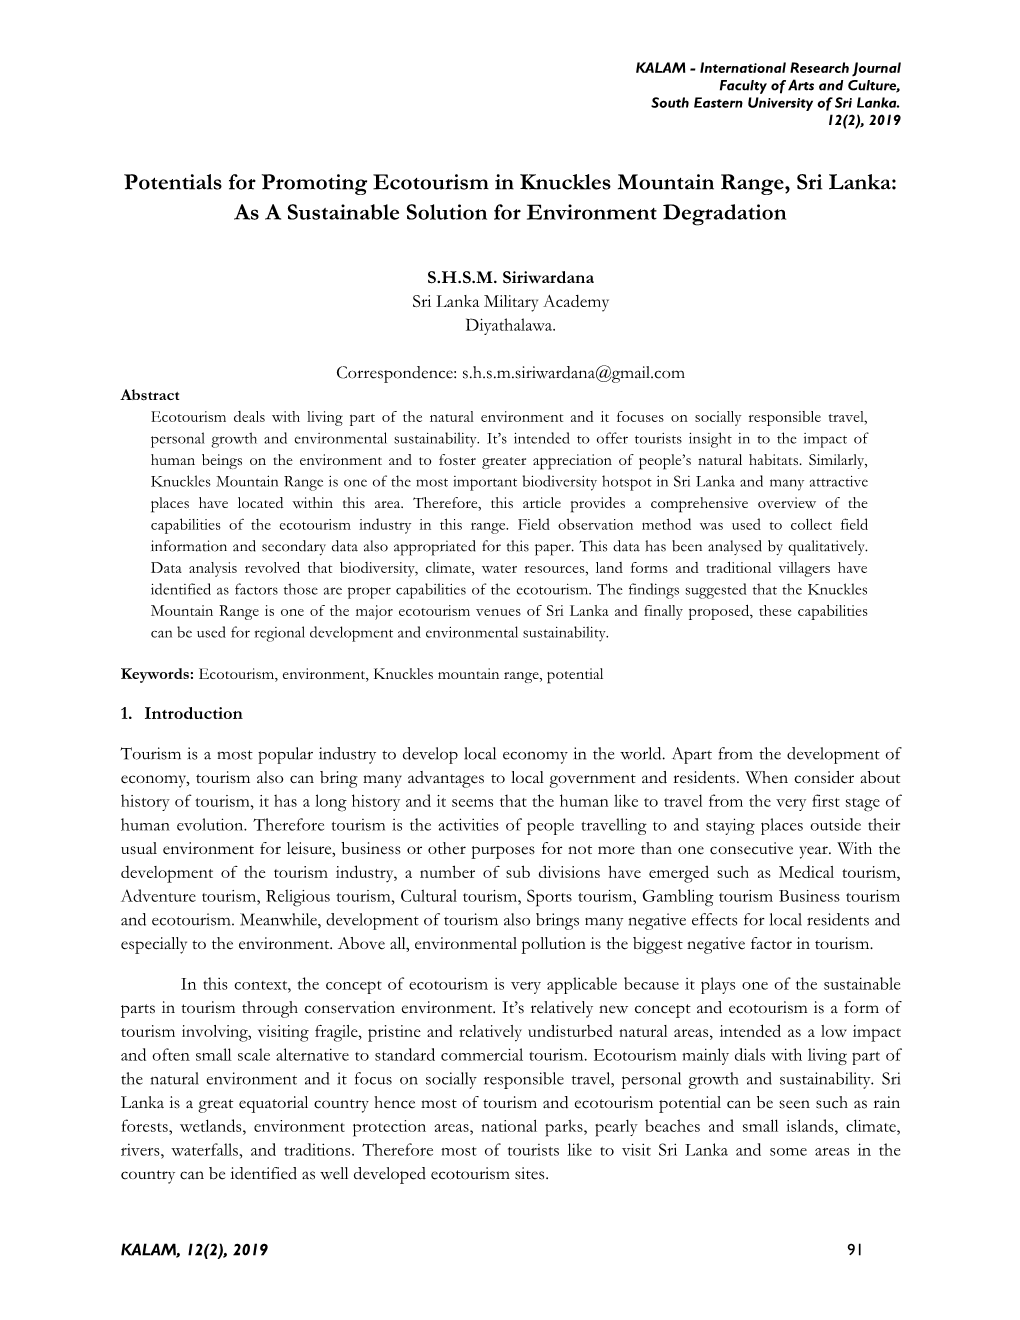 Potentials for Promoting Ecotourism in Knuckles Mountain Range, Sri Lanka: As a Sustainable Solution for Environment Degradation